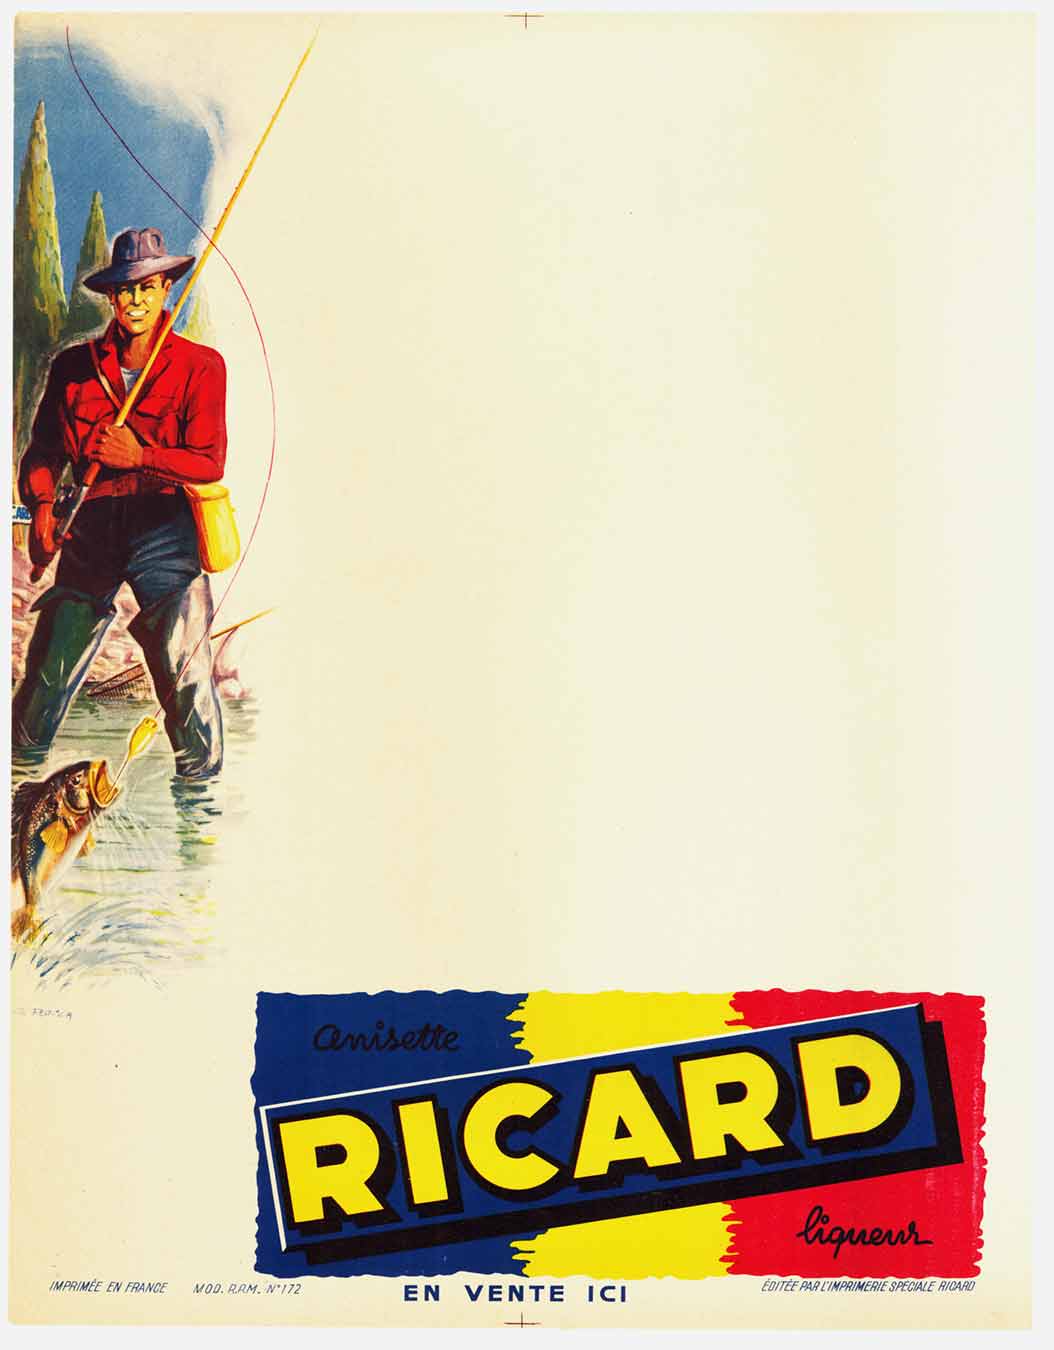 Ricard liqueur. This is a 'blank format' for Ricard liquor featuring a fisherman along the shore of a river or lake. The white area in the right side is where the text would appear for the store or location where you could purchase the Ricard for you